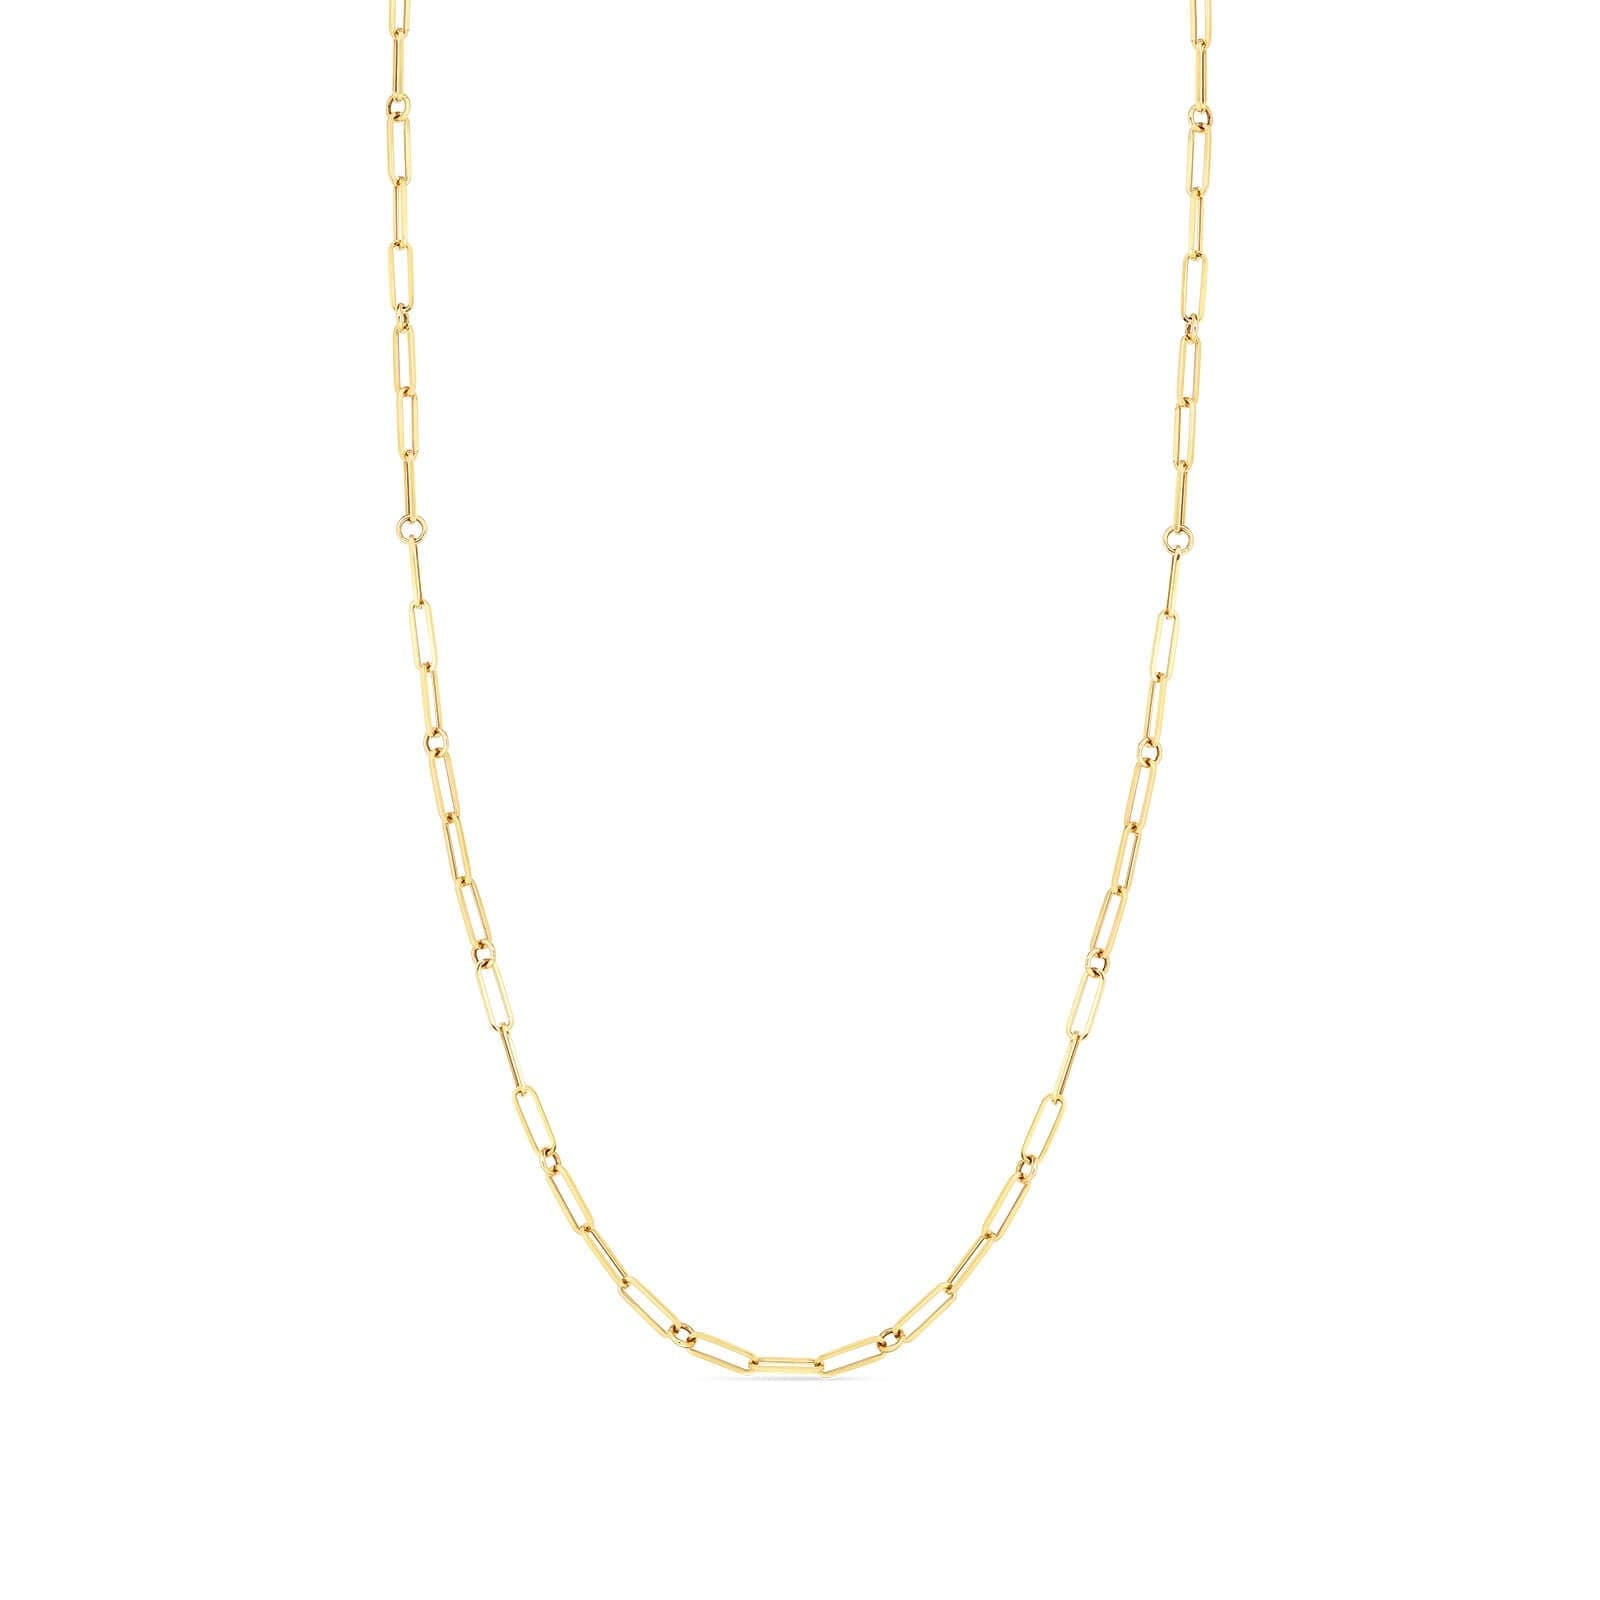 Roberto Coin Necklaces and Pendants Designer Gold 18k Yellow Gold 22" Paperclip Necklace